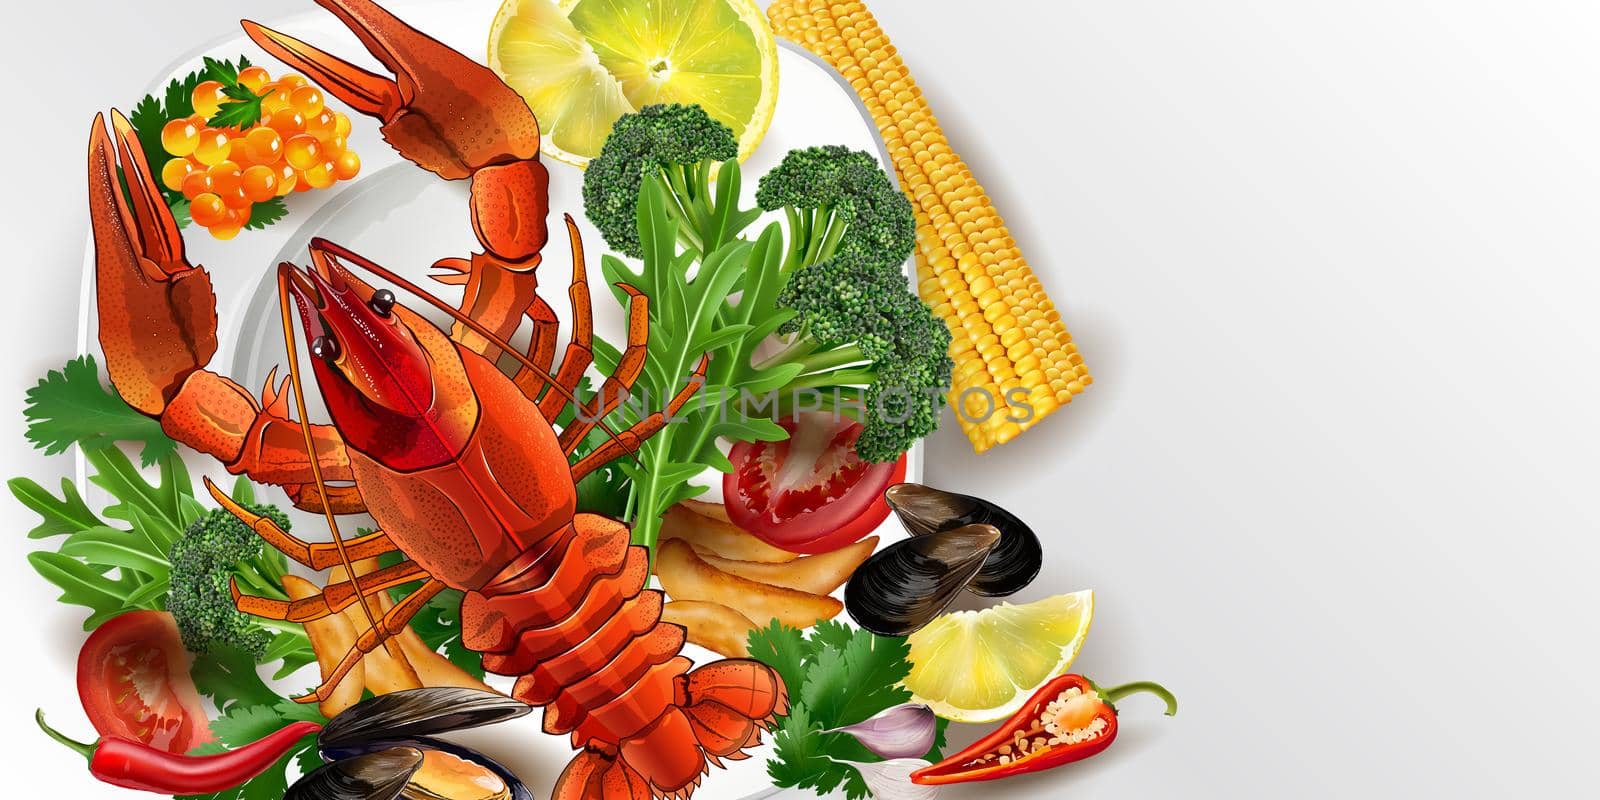 Lobster, red caviar and mussels with vegetables on a white plate. Realistic style illustration.